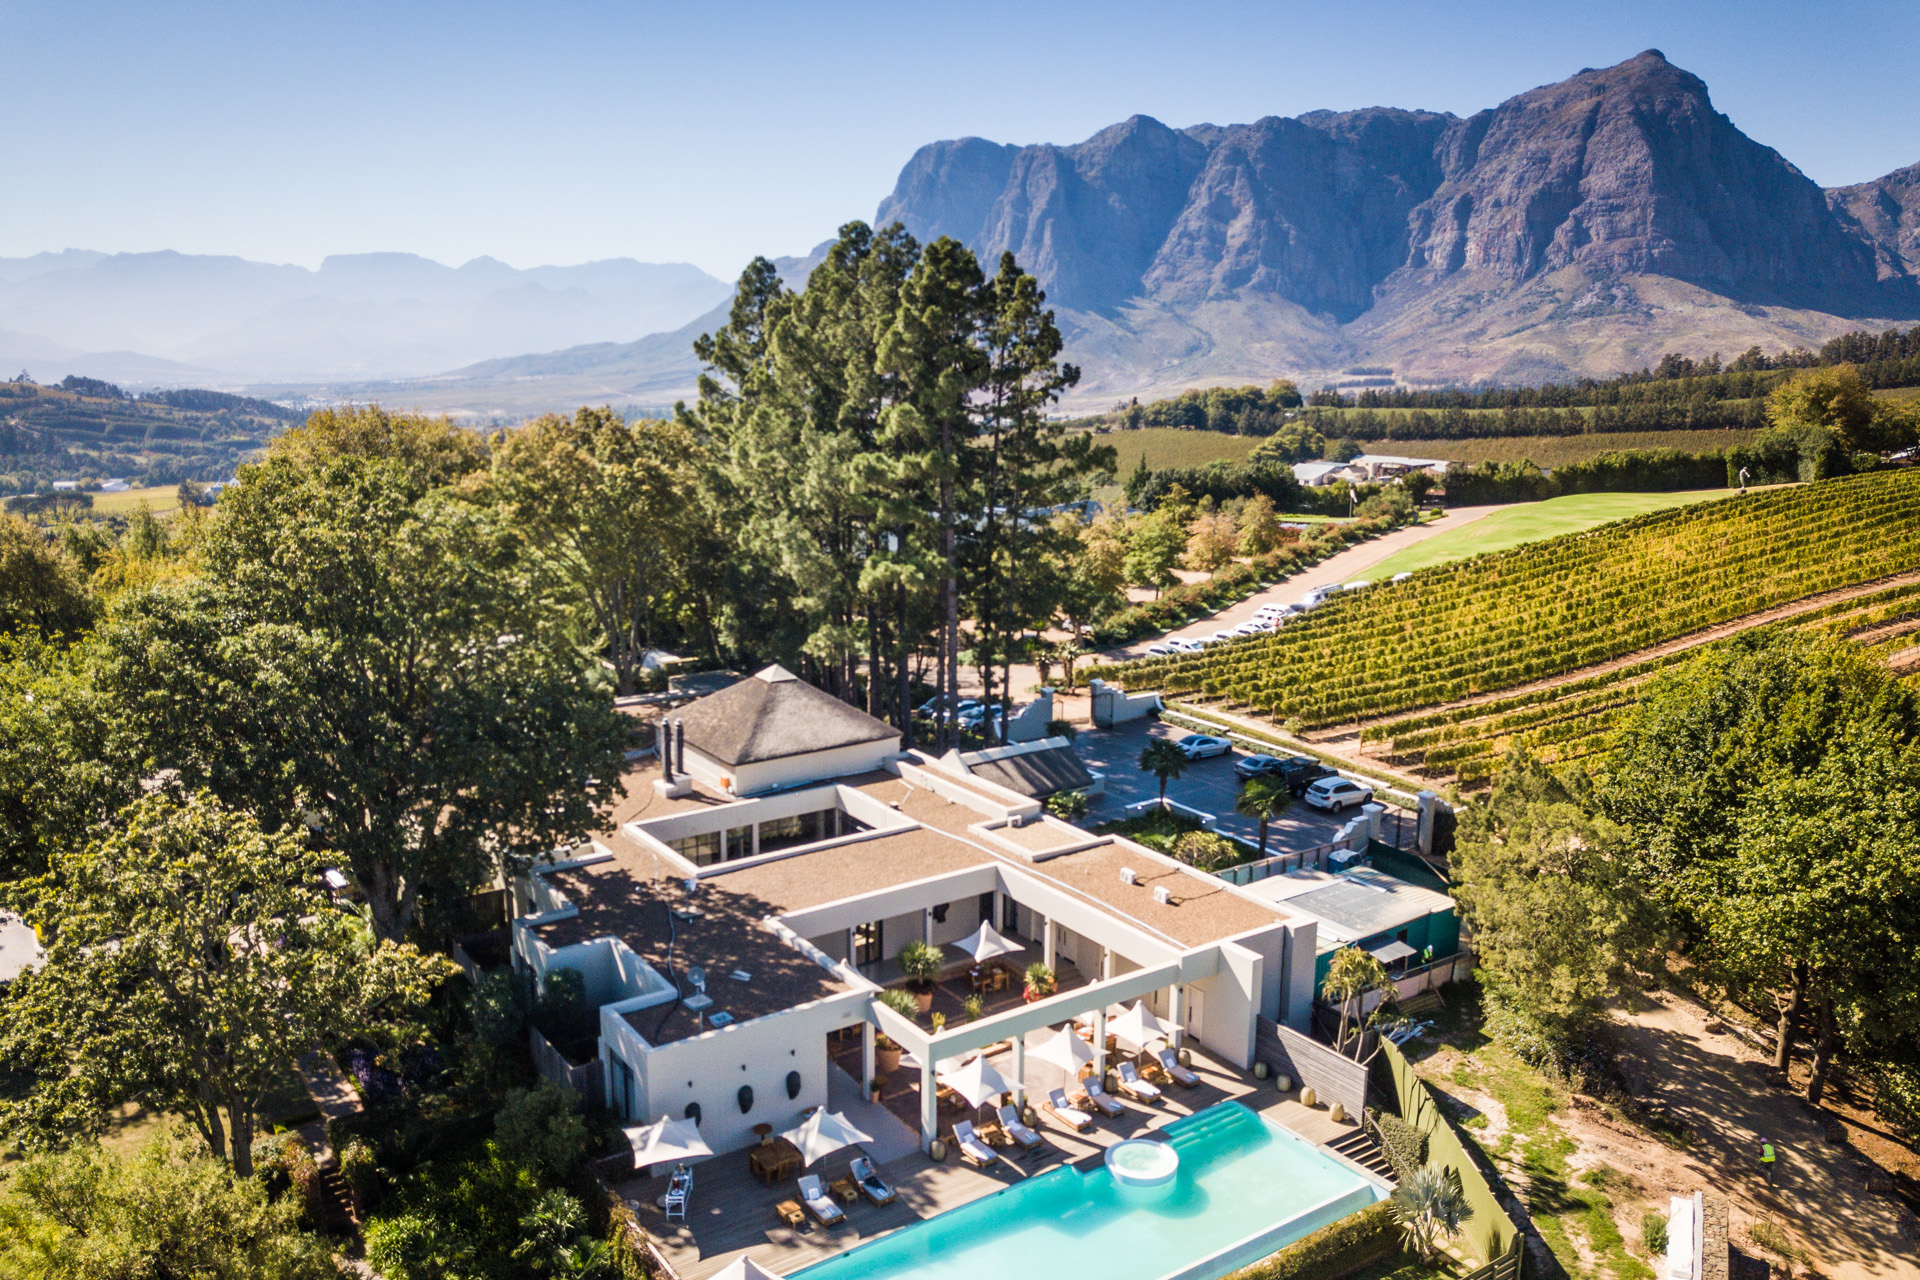 Incomparable Art & Interiors: Delaire Graff Estate, South Africa – Hotel Review